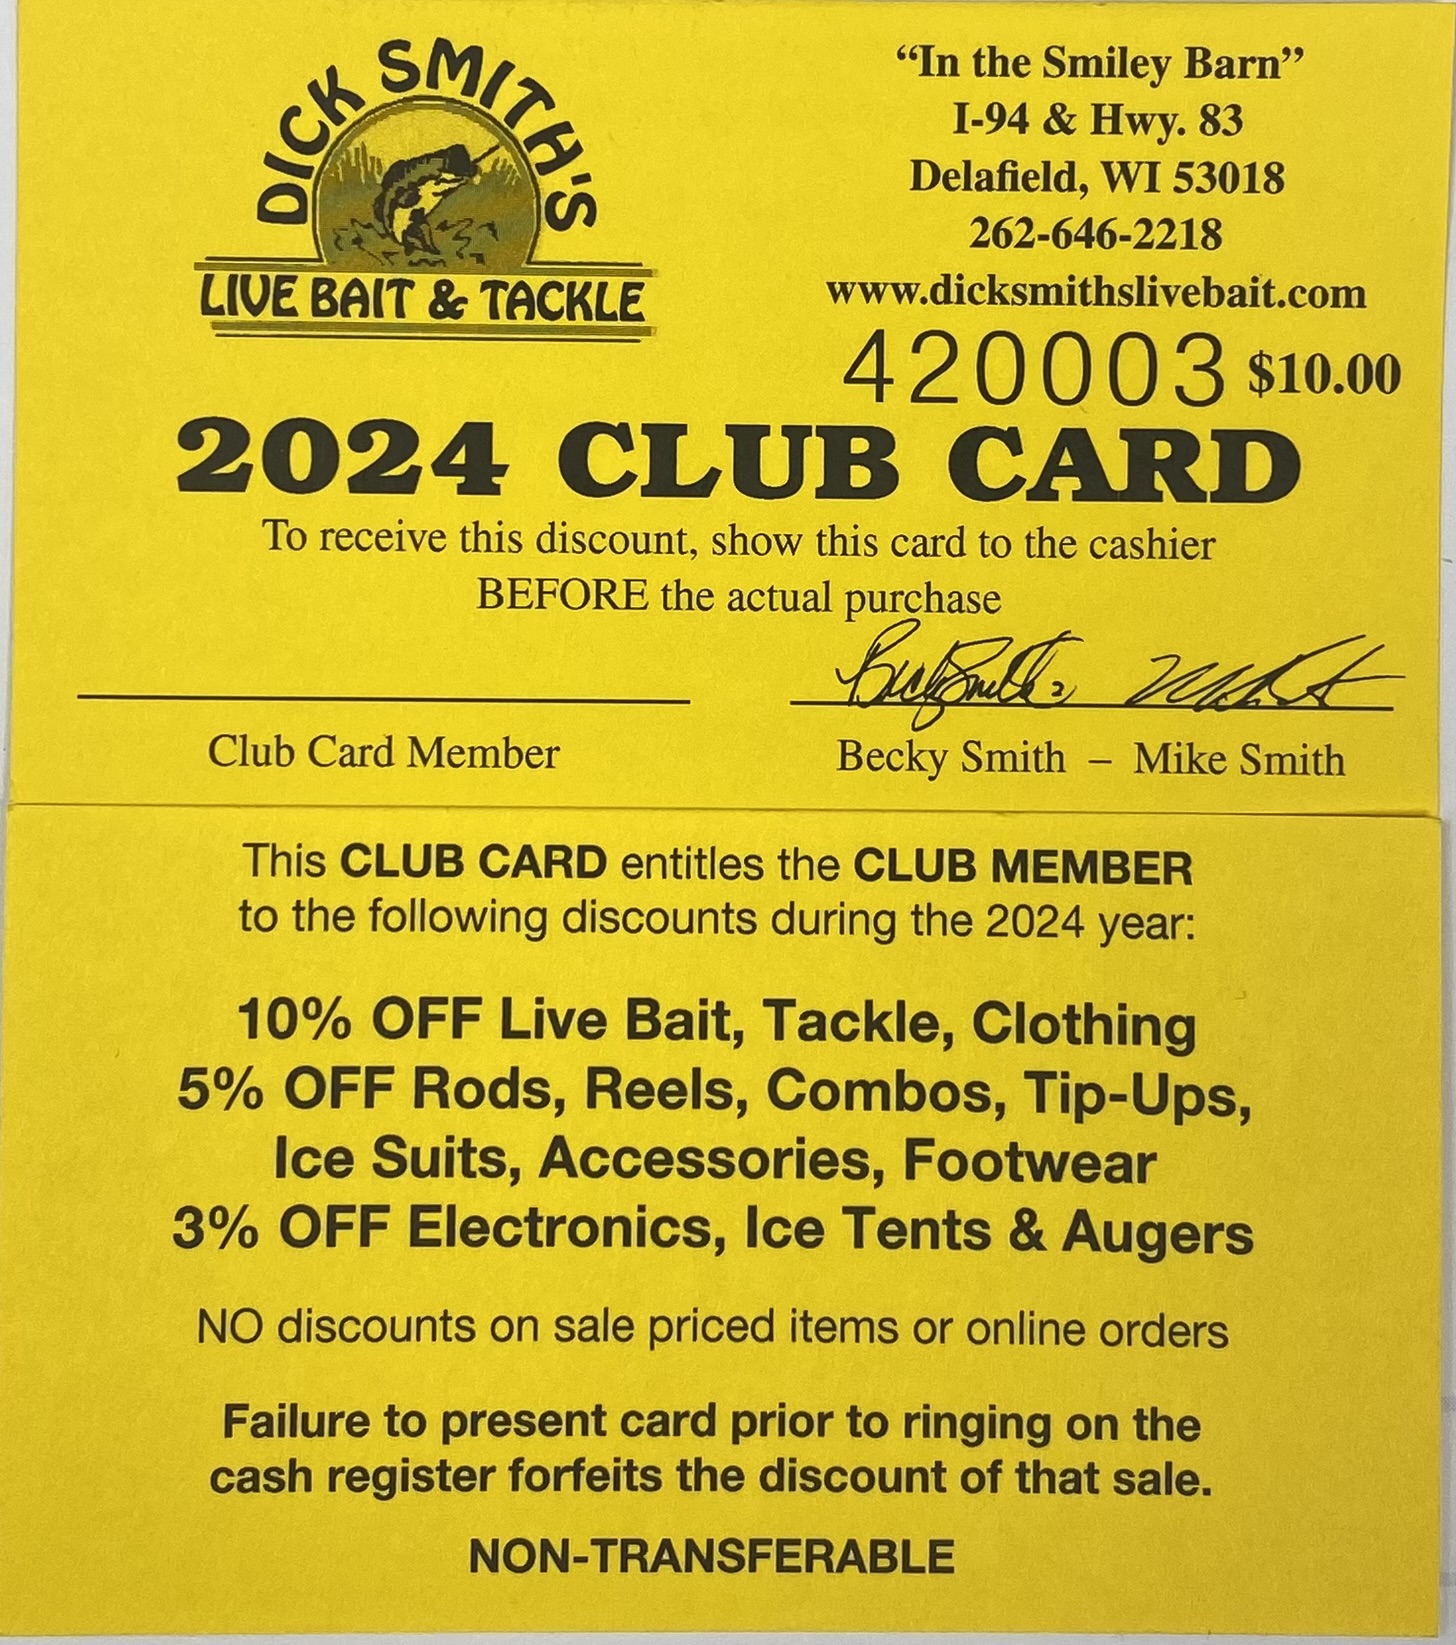 Dick Smith's 2024 Discount Club Card